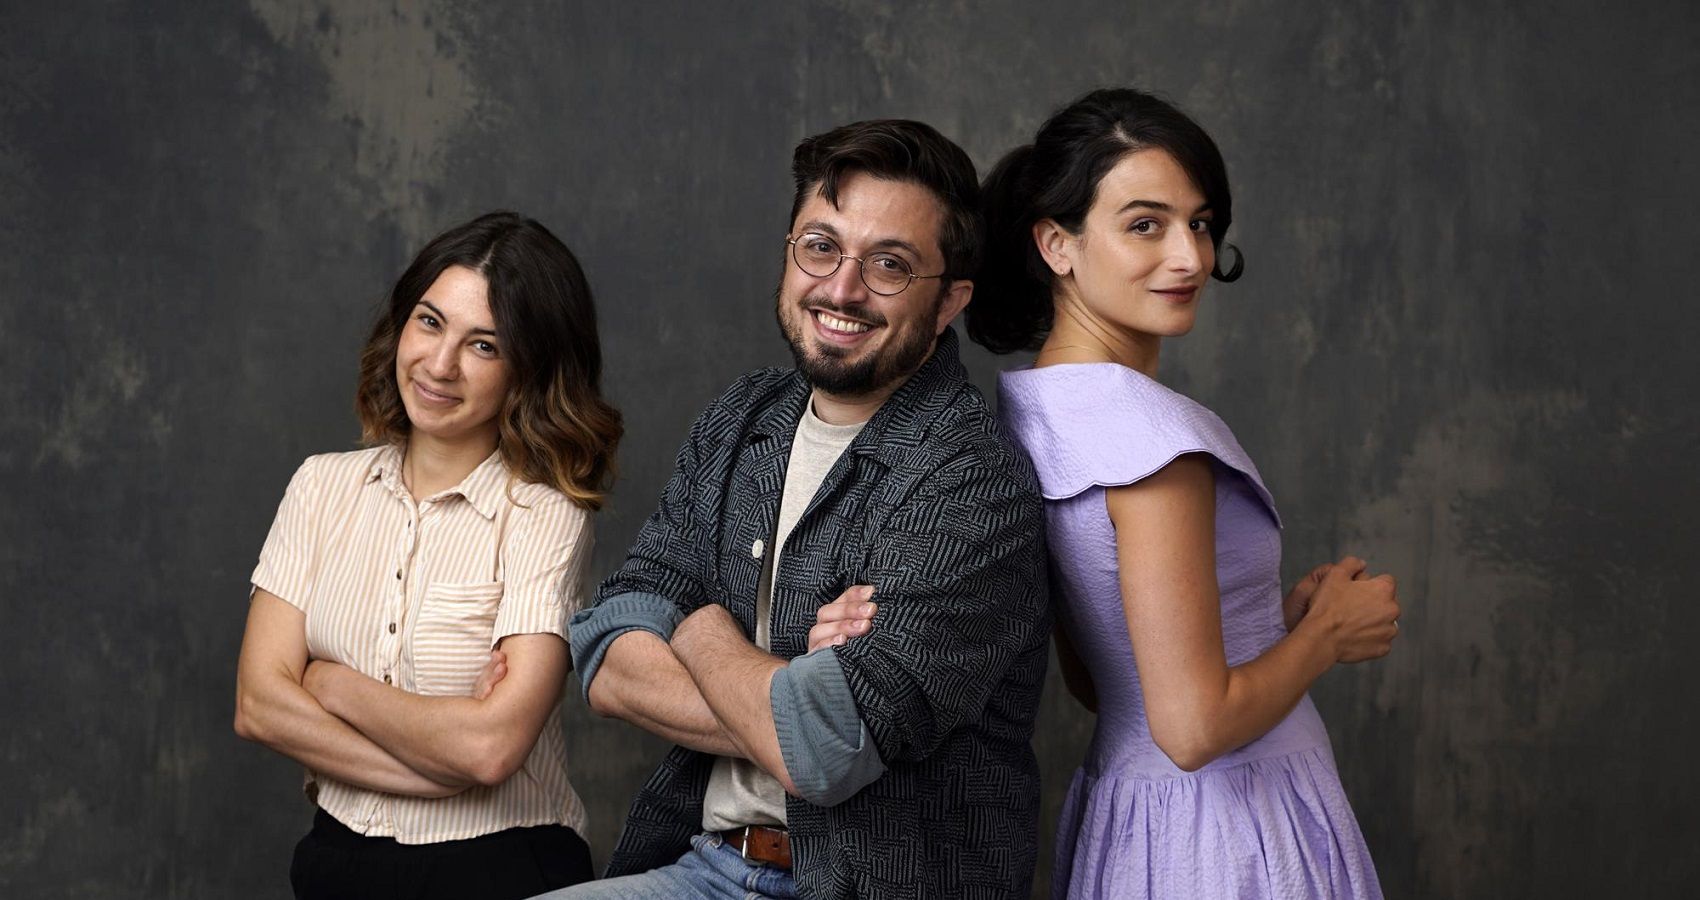 Jenny Slate, Dean Fleischer-Camp, and Kristen Lepore photoshoot in front of a grey background